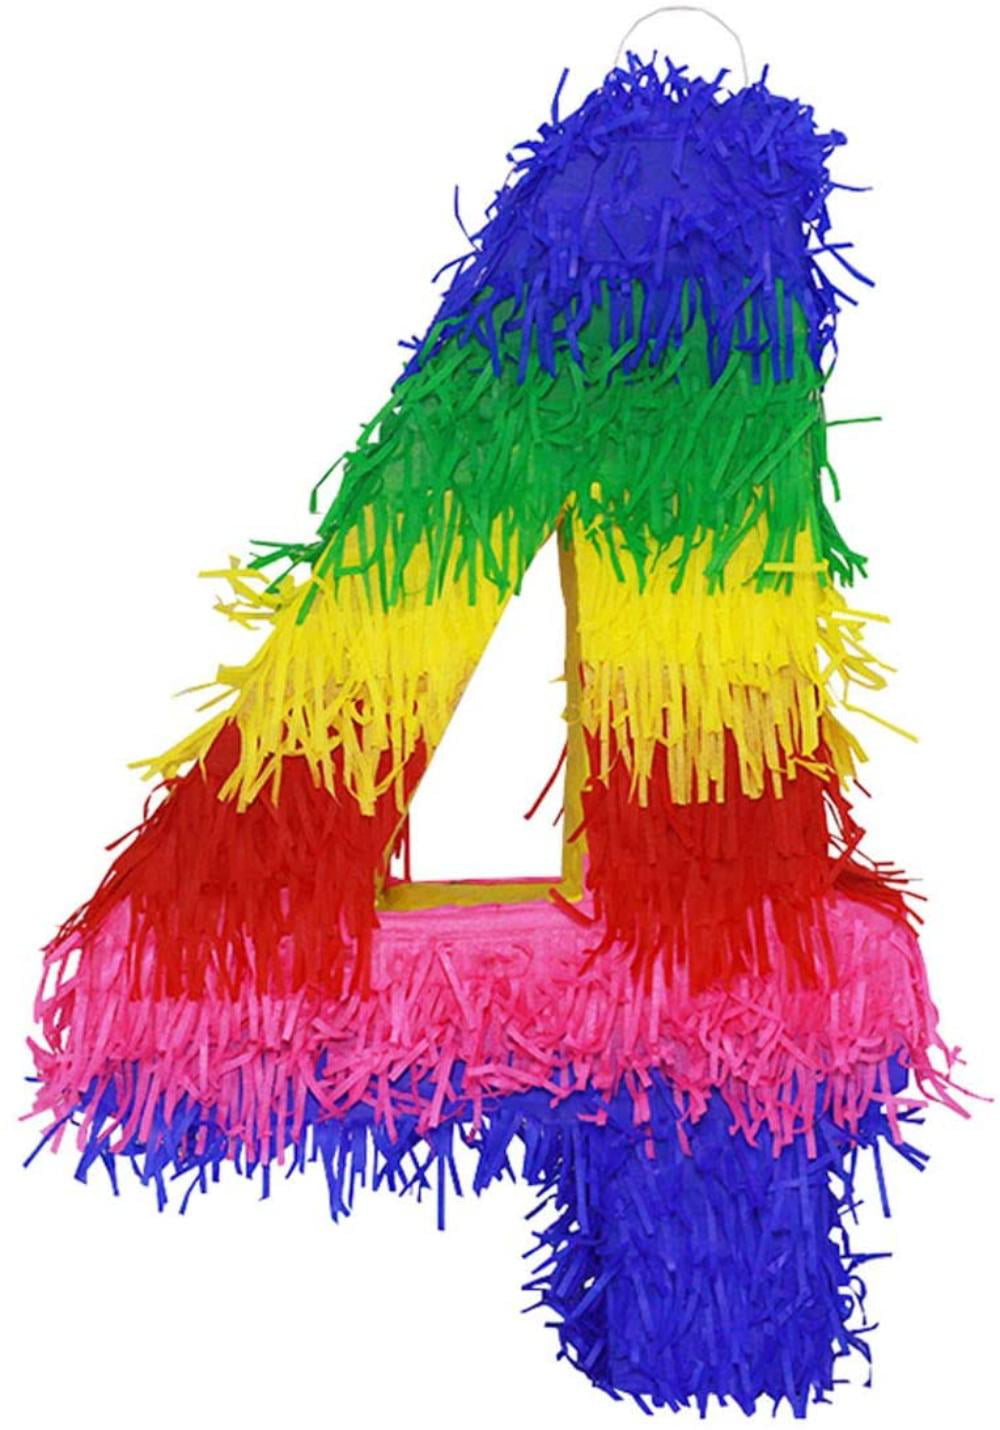 Seven Photo Prop Center Piece Décor LYTIO 3D Number Pinata Vibrant Multi Colored Paper Handmade Small Piñata Great for Any Birthday or Anniversary Party 